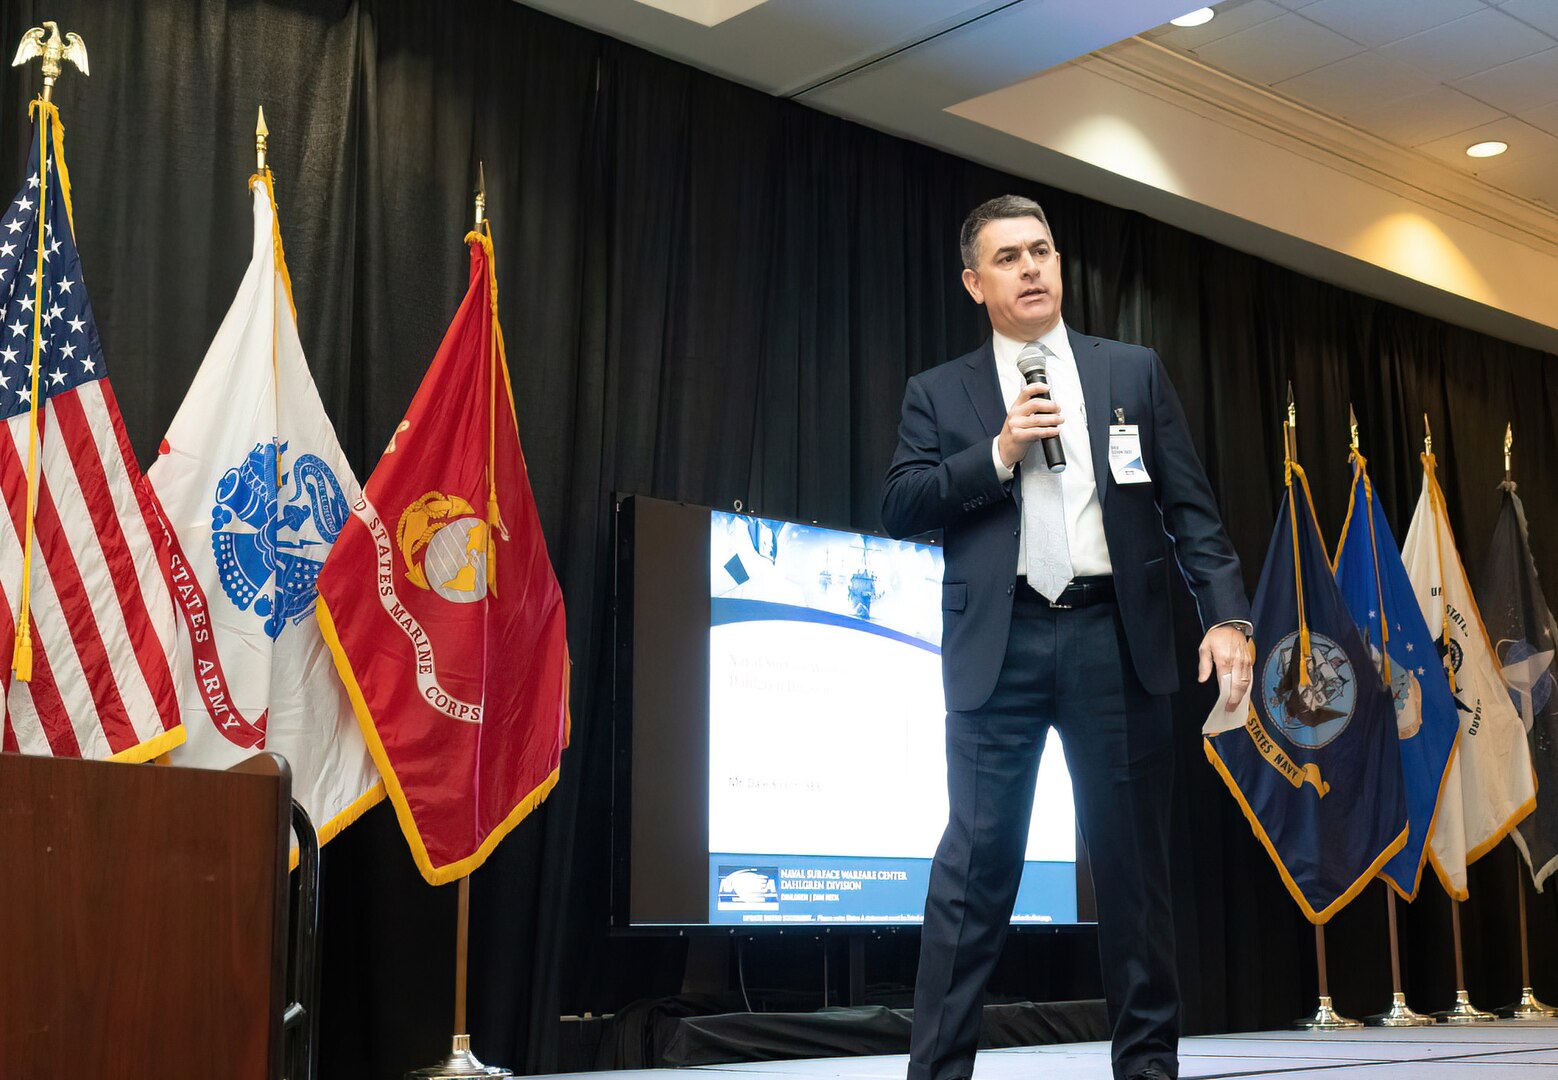 IMAGE: Naval Surface Warfare Center Dahlgren Division (NSWCDD) Technical Director, Dale Sisson, SES, delivers his remarks on the warfare center division’s strategic overview during the 2022 NSWCDD Outreach and Industry Day, May 18.